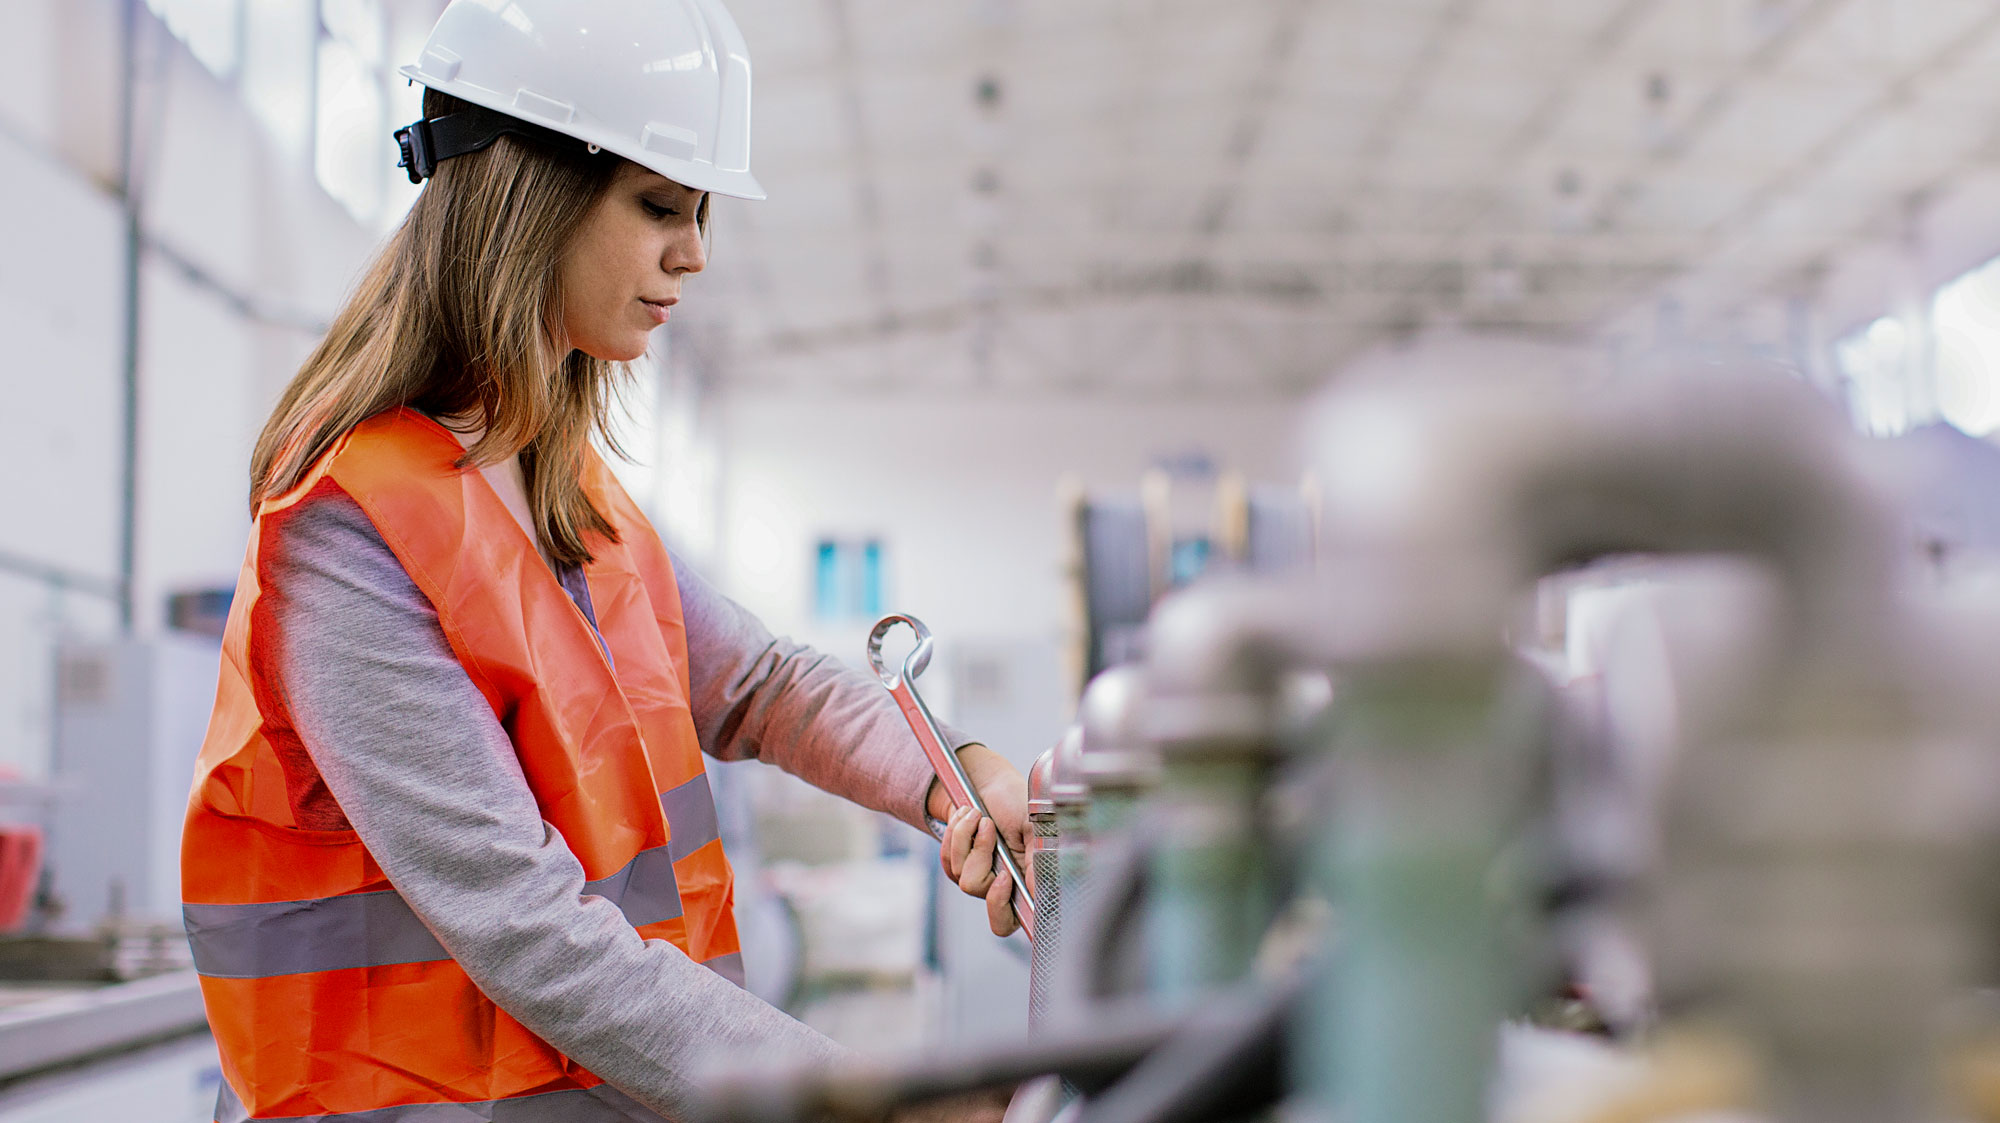 Woman in a hard hat and safety vest on a manufacturing line